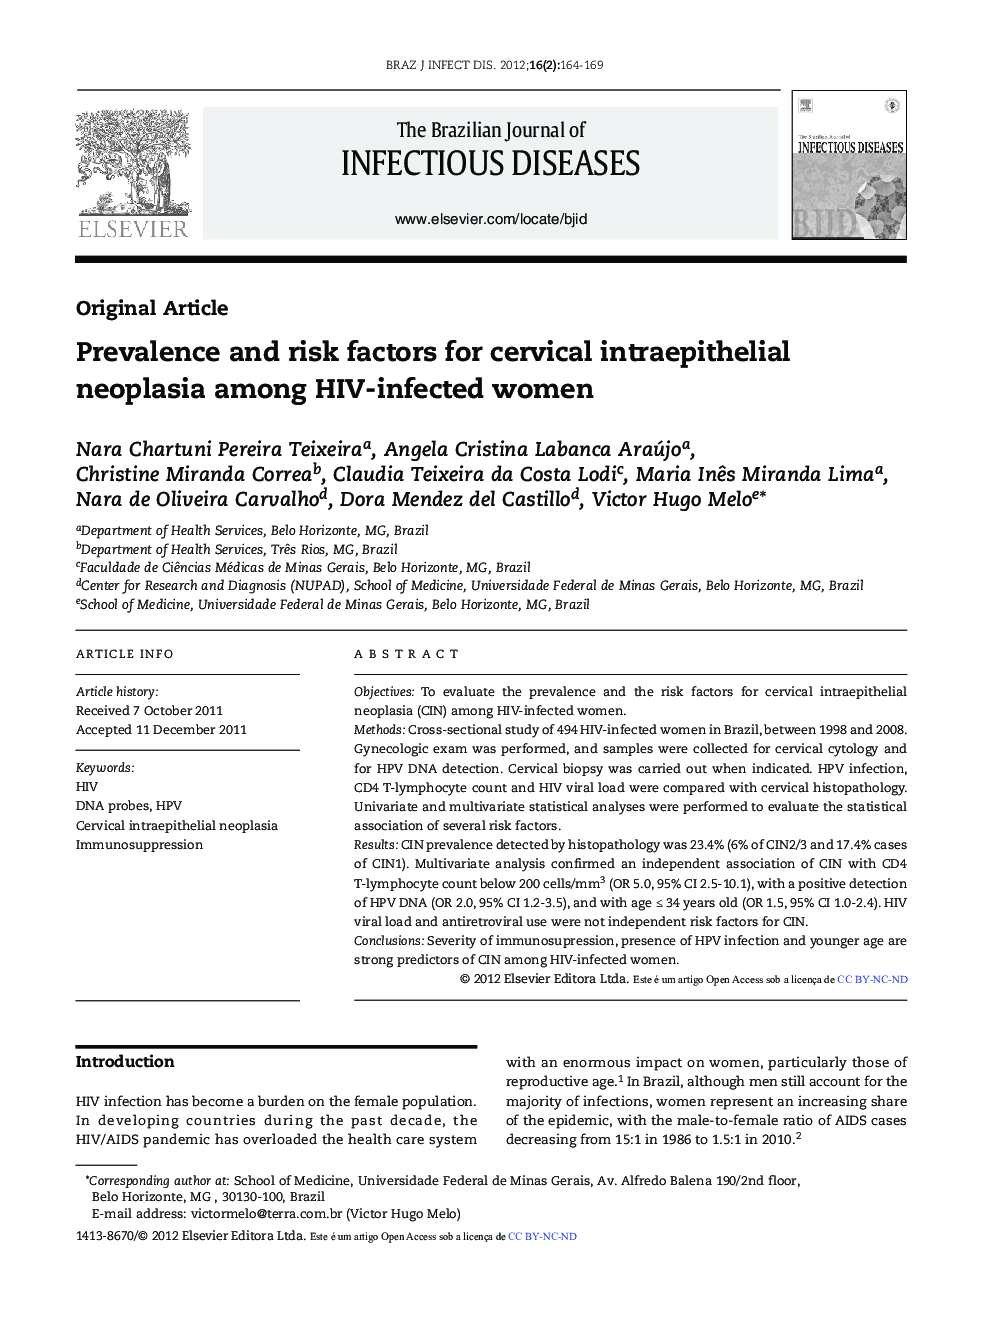 Prevalence and risk factors for cervical intraepithelial neoplasia among HIV-infected women